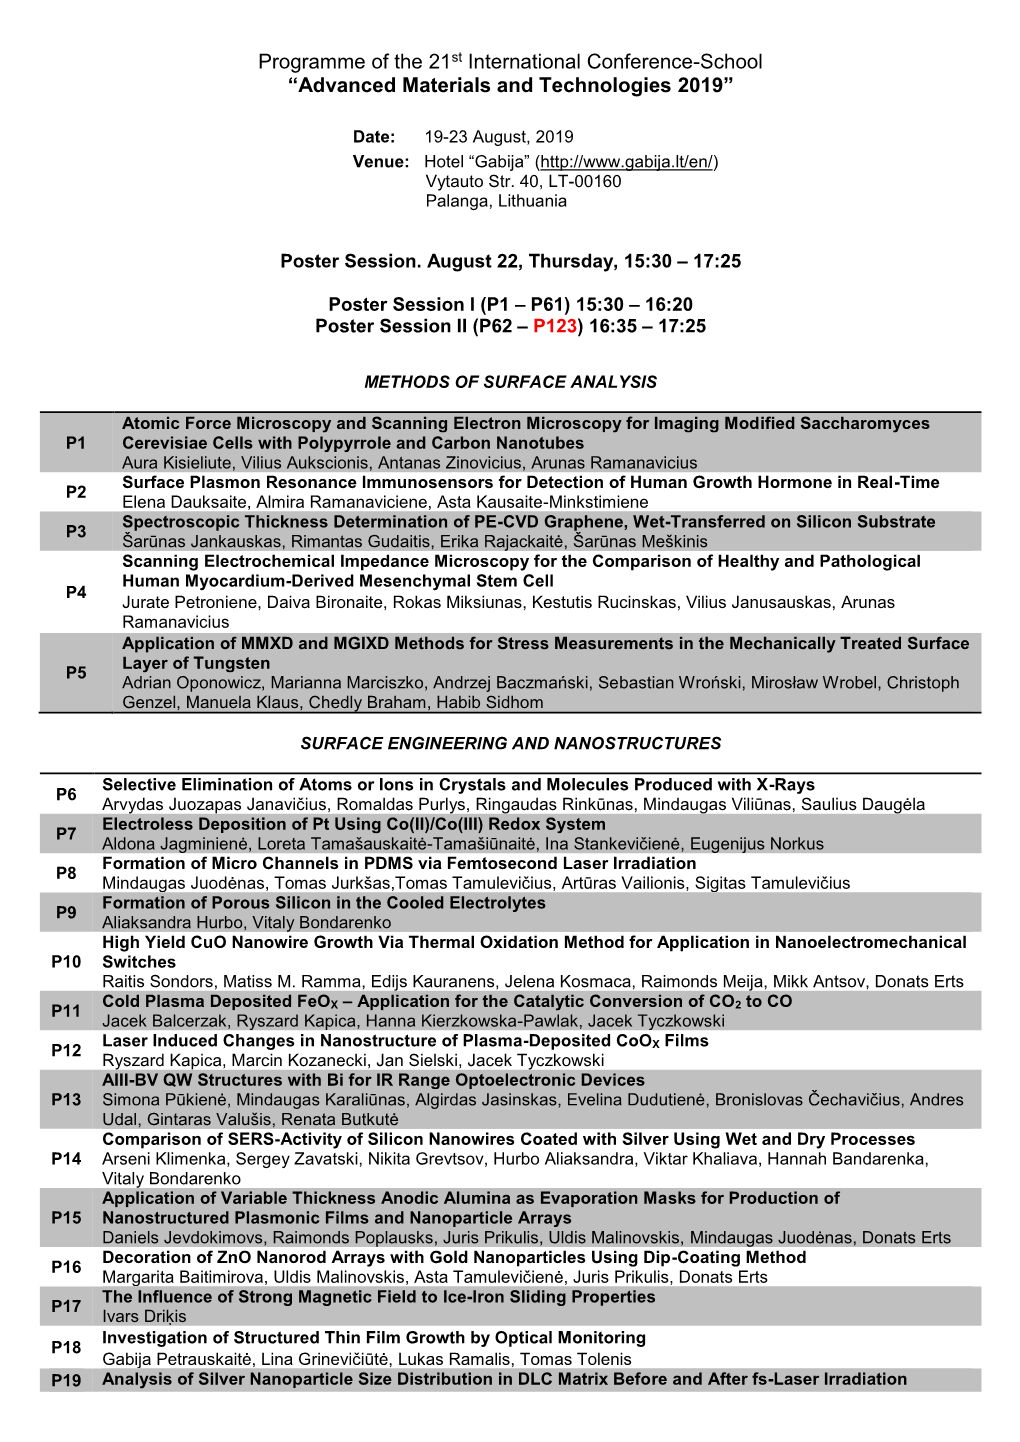 Poster Session Programme Download